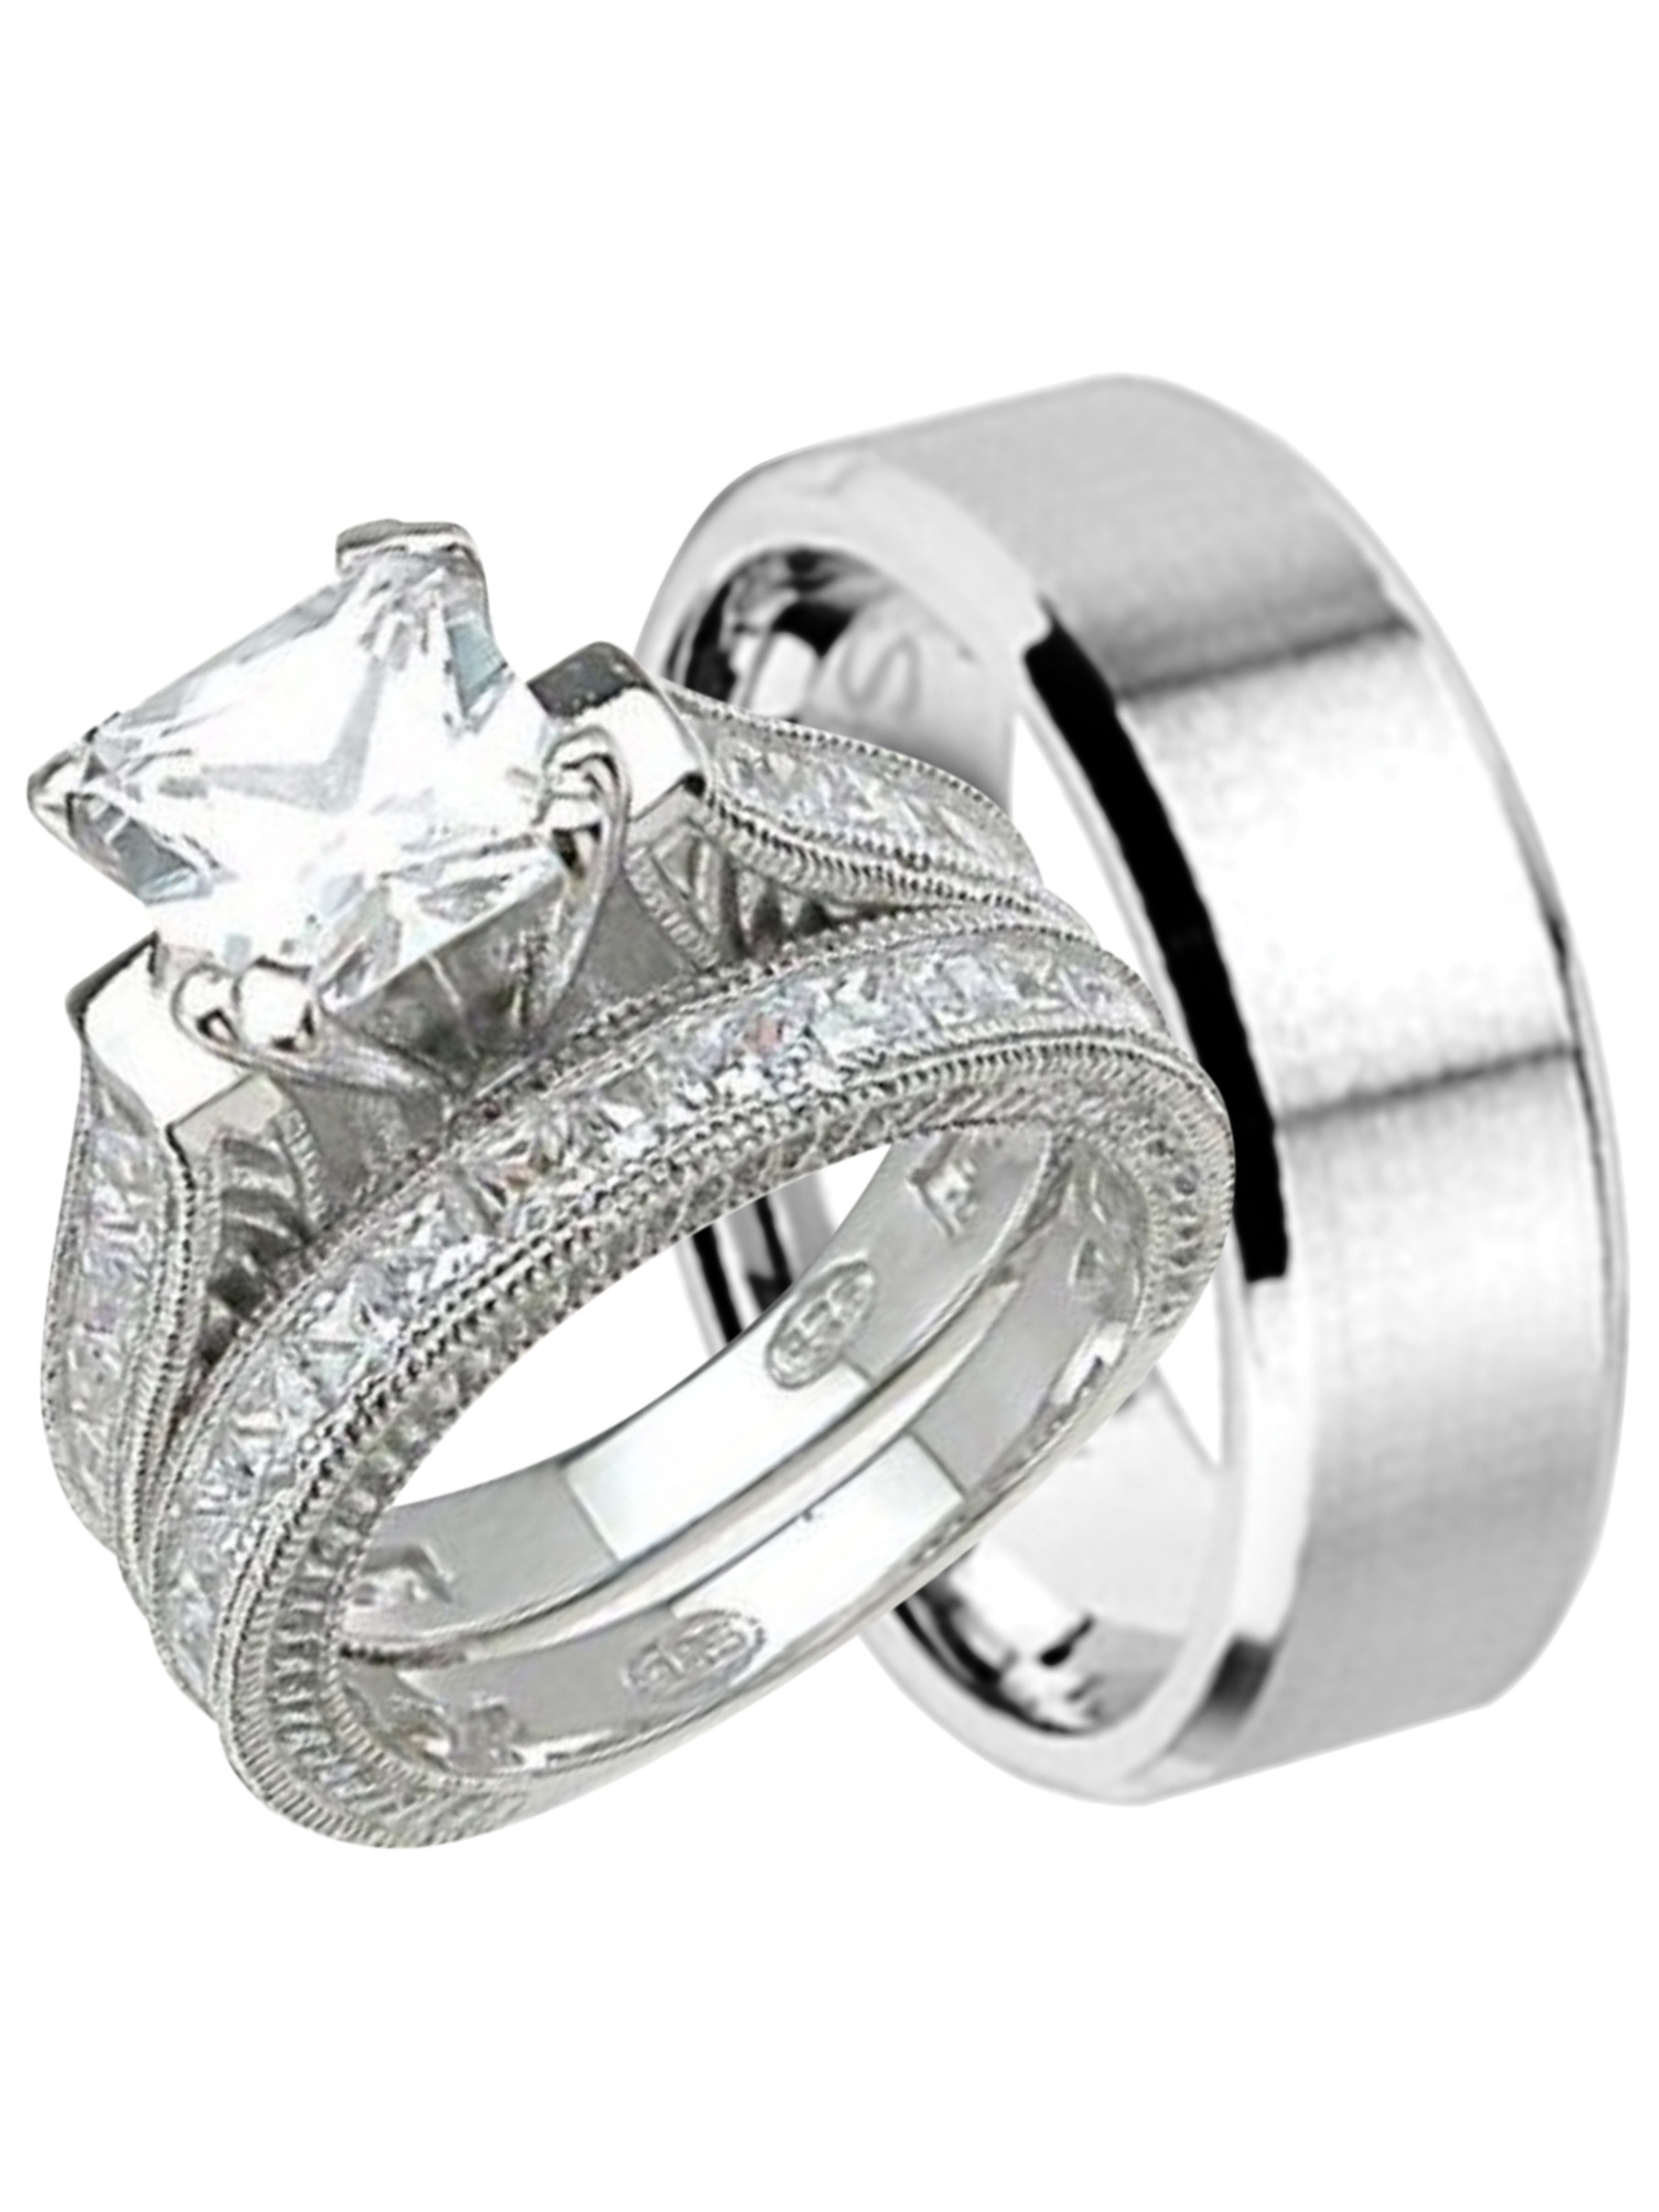 Cheap Wedding Bands For Him And Her
 LaRaso & Co His and Hers Wedding Ring Set Cheap Wedding